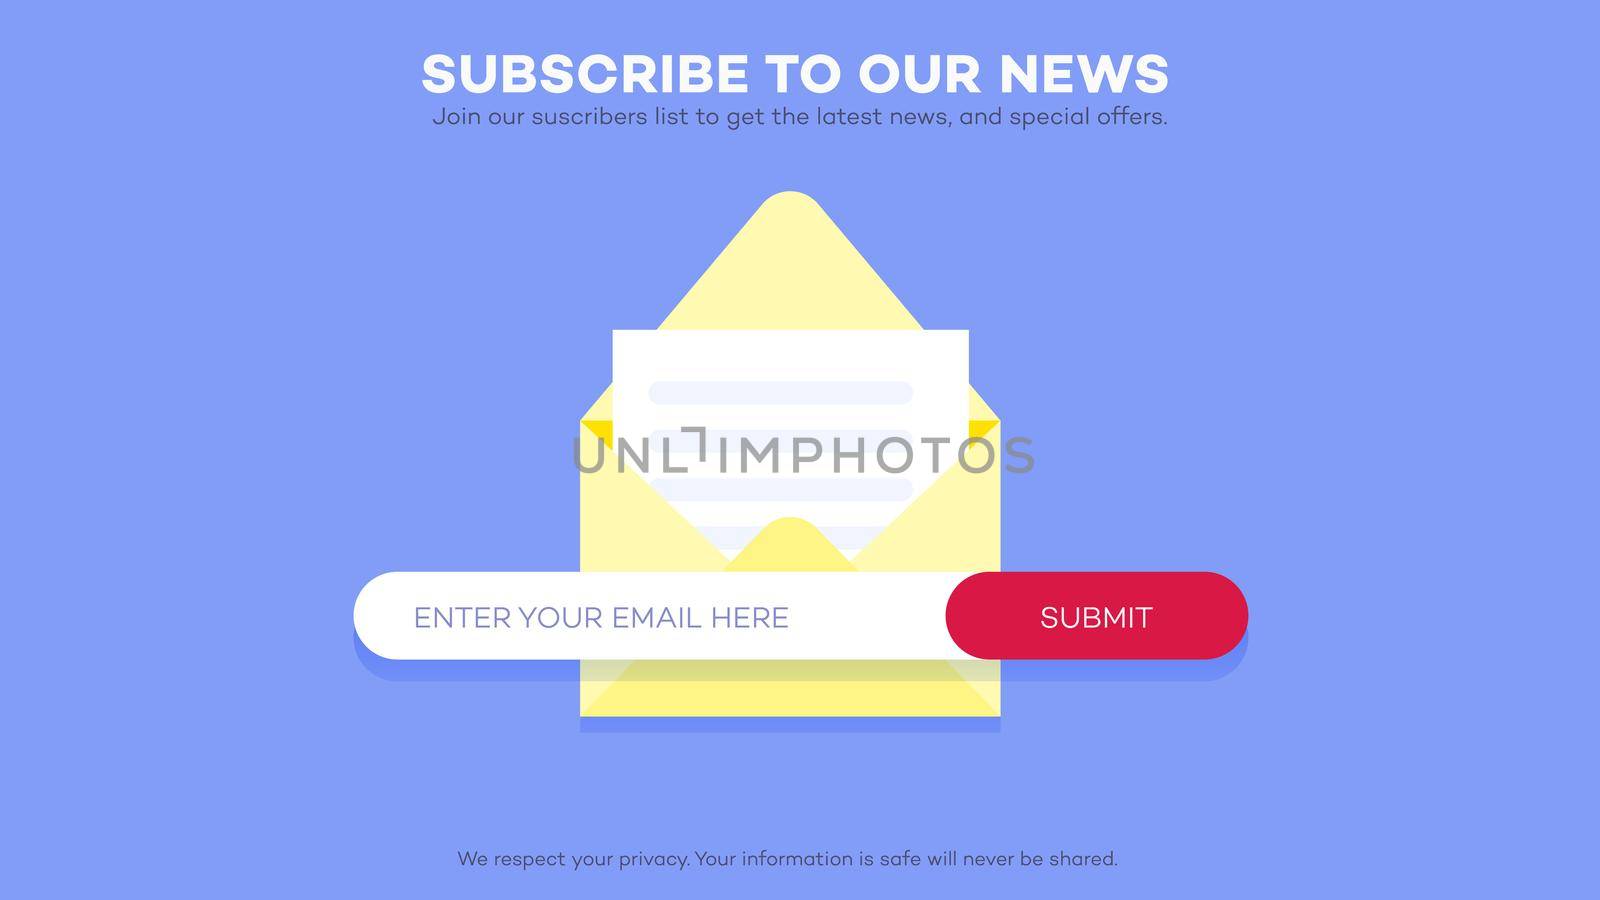 Email subscribe to latest news. Website element with e-mail subscribition form. Web template for subscribition page design. Clean and simple vector illustration.